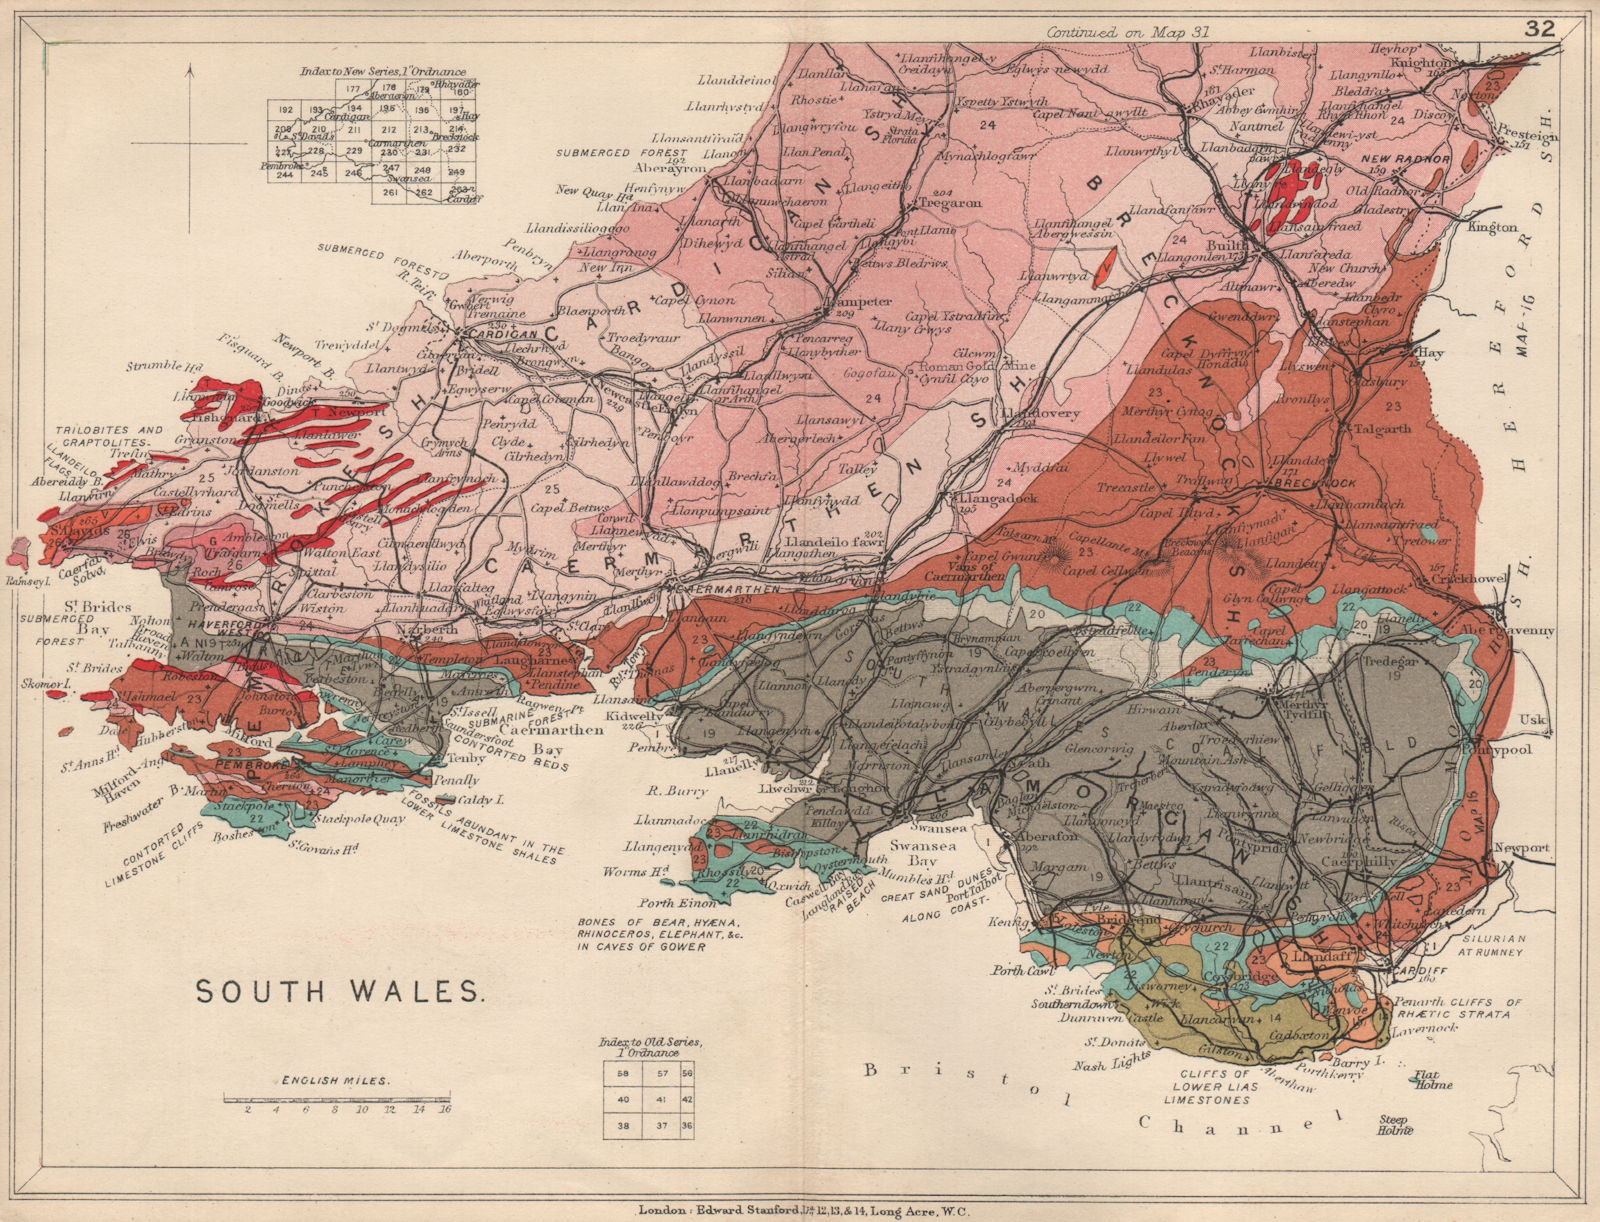 Associate Product SOUTH WALES Geological map. STANFORD 1913 old antique vintage plan chart